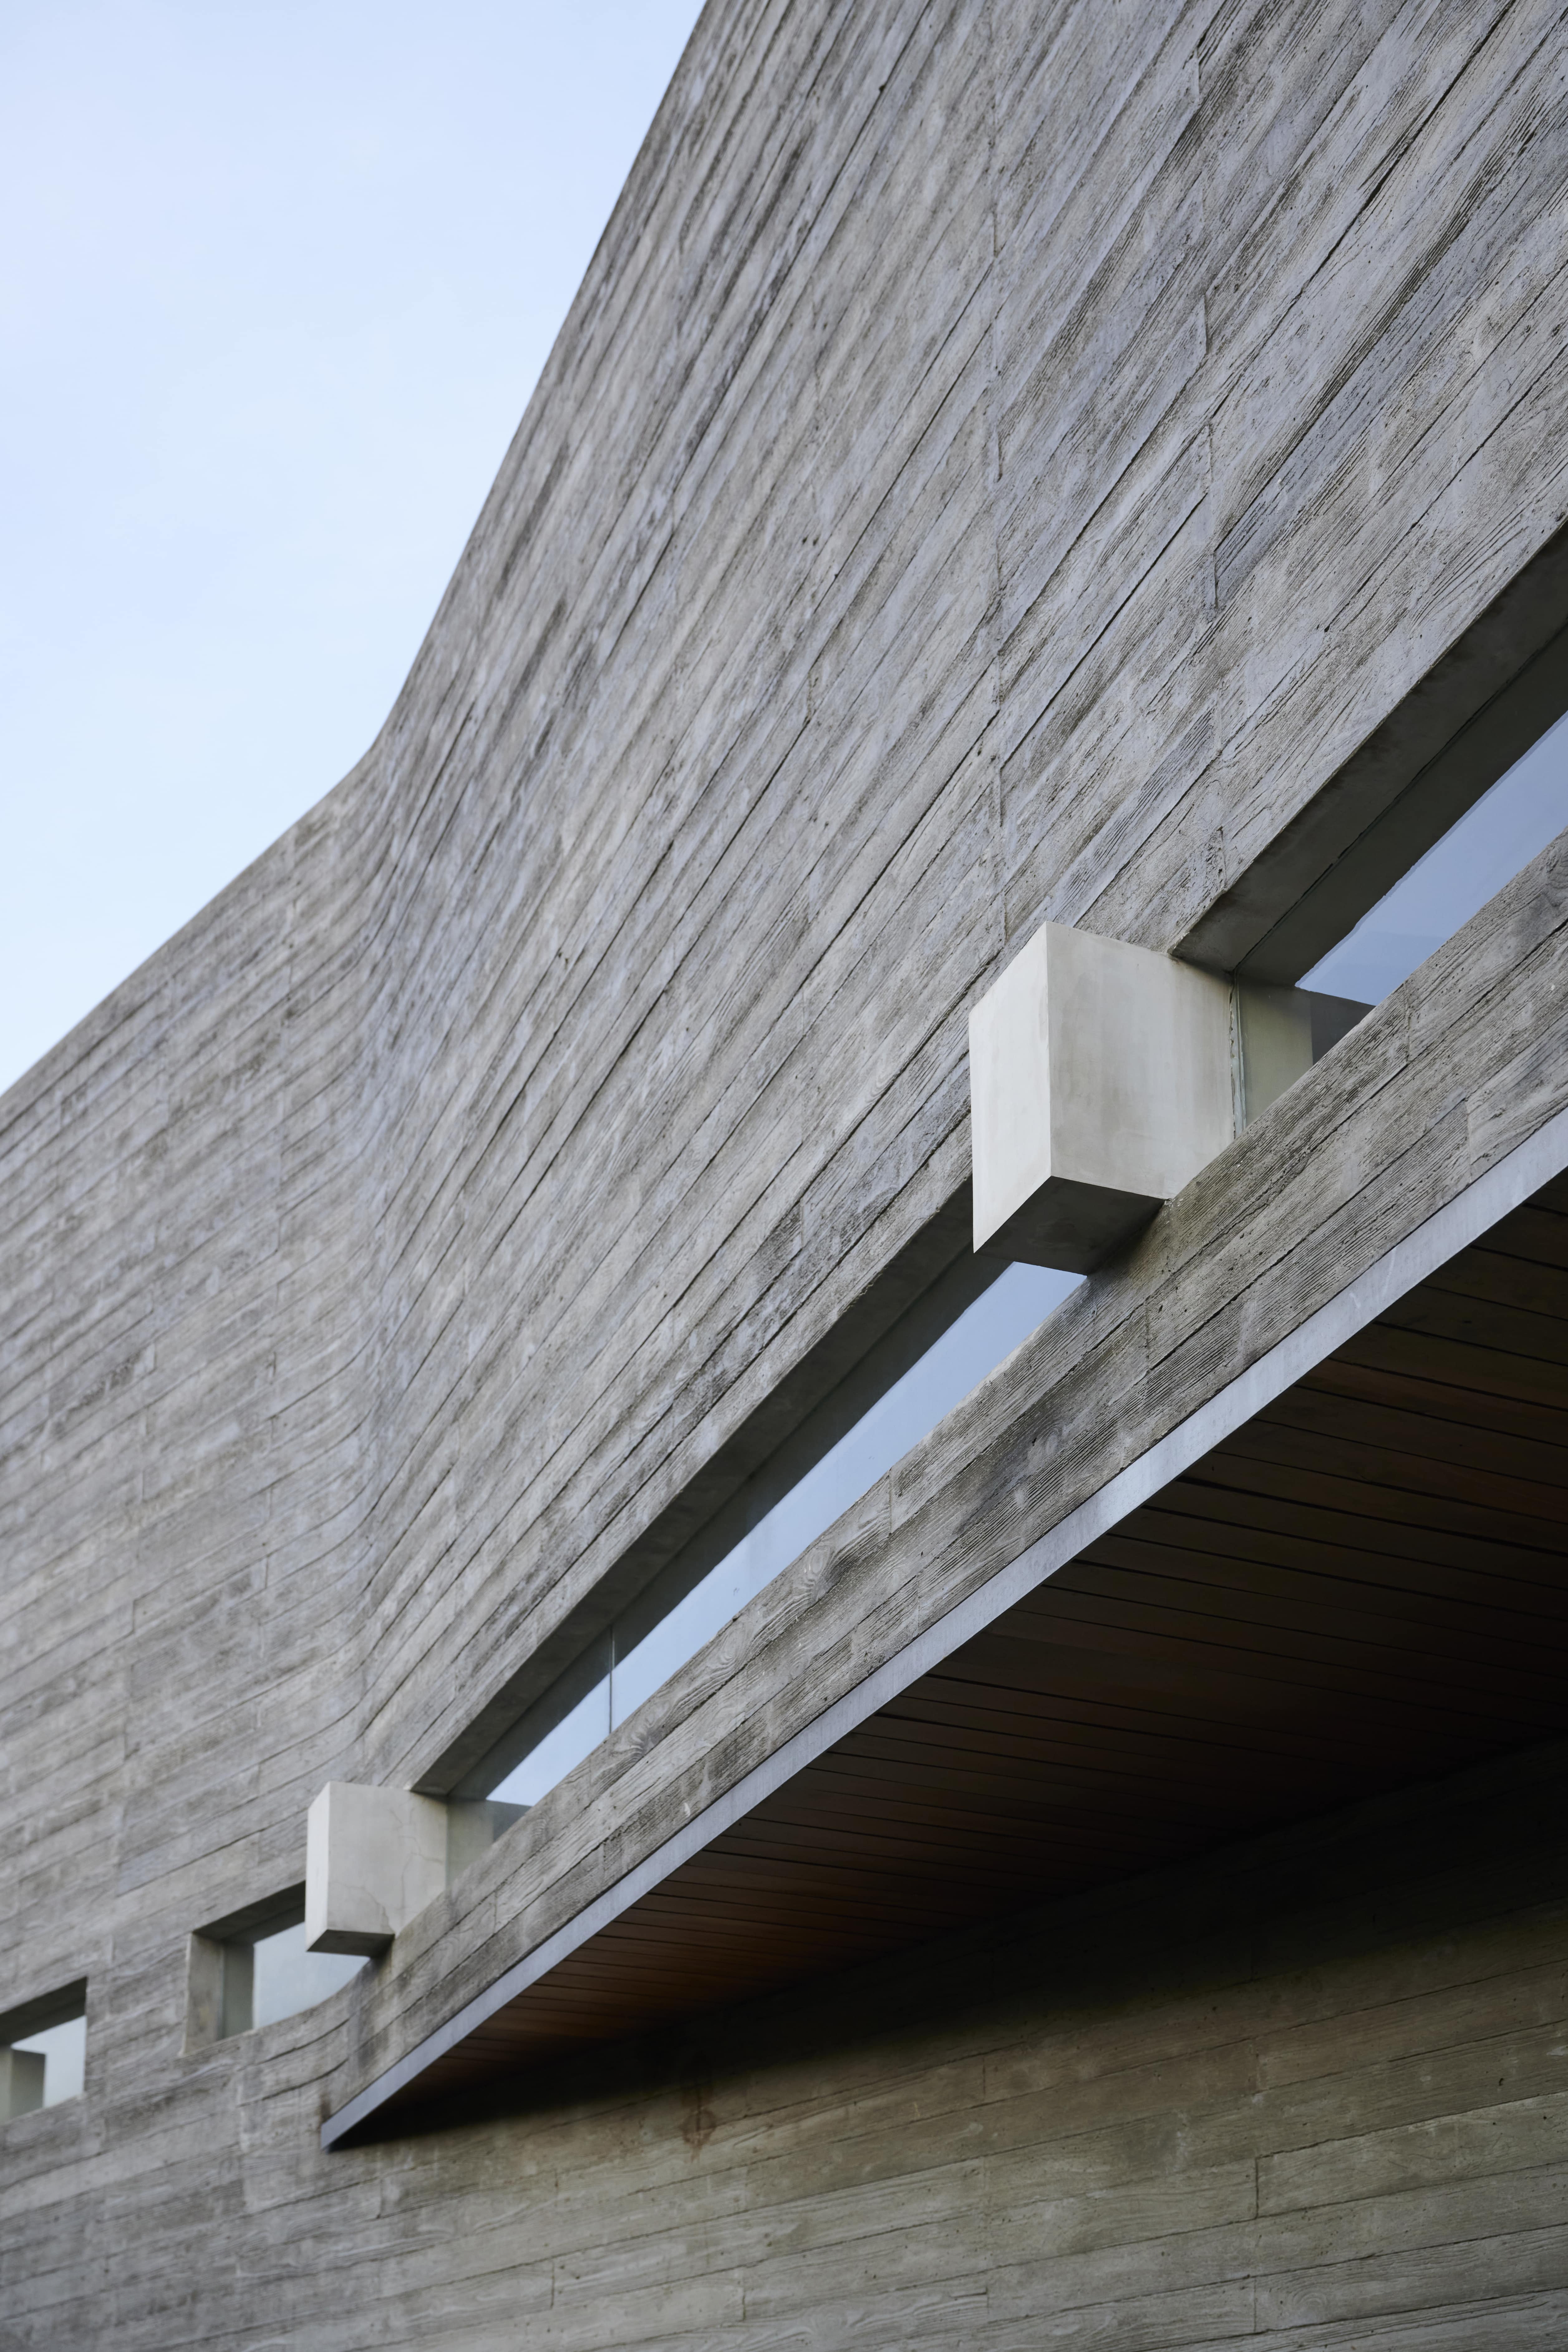 The use of wood-textured exposed concrete material for the outer surface of the house